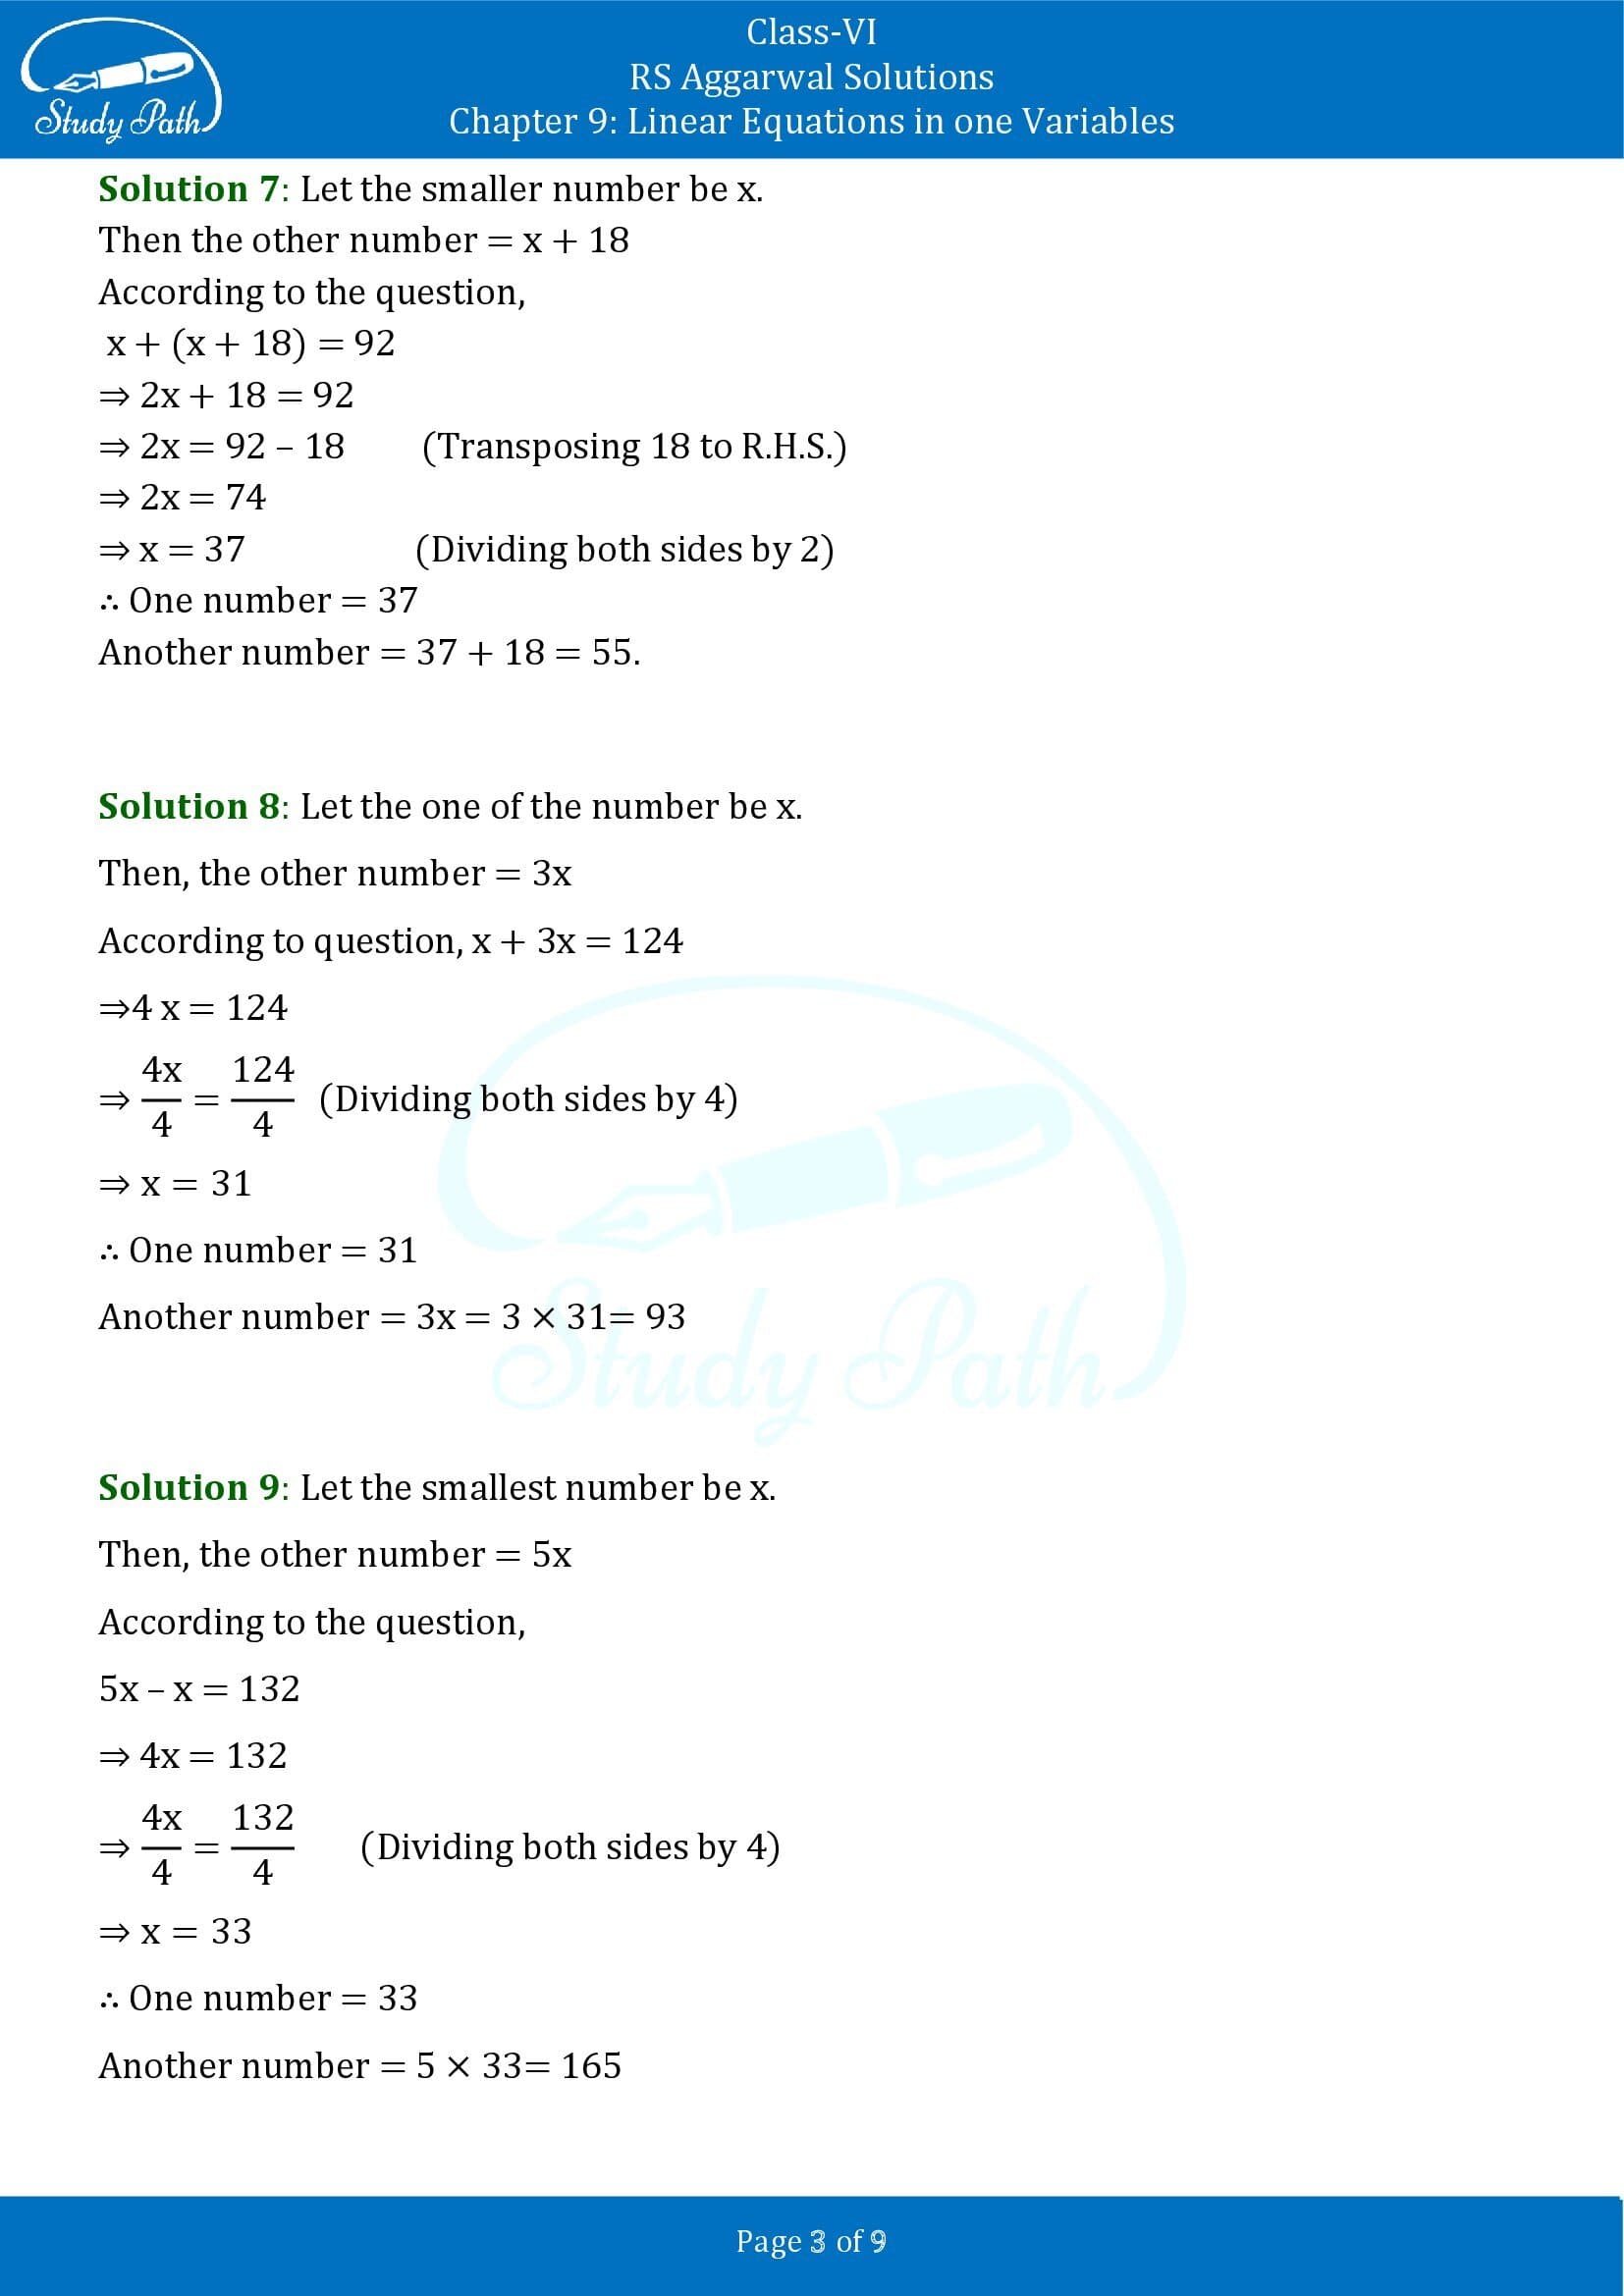 RS Aggarwal Solutions Class 6 Chapter 9 Linear Equations in One Variable Exercise 9C 00003